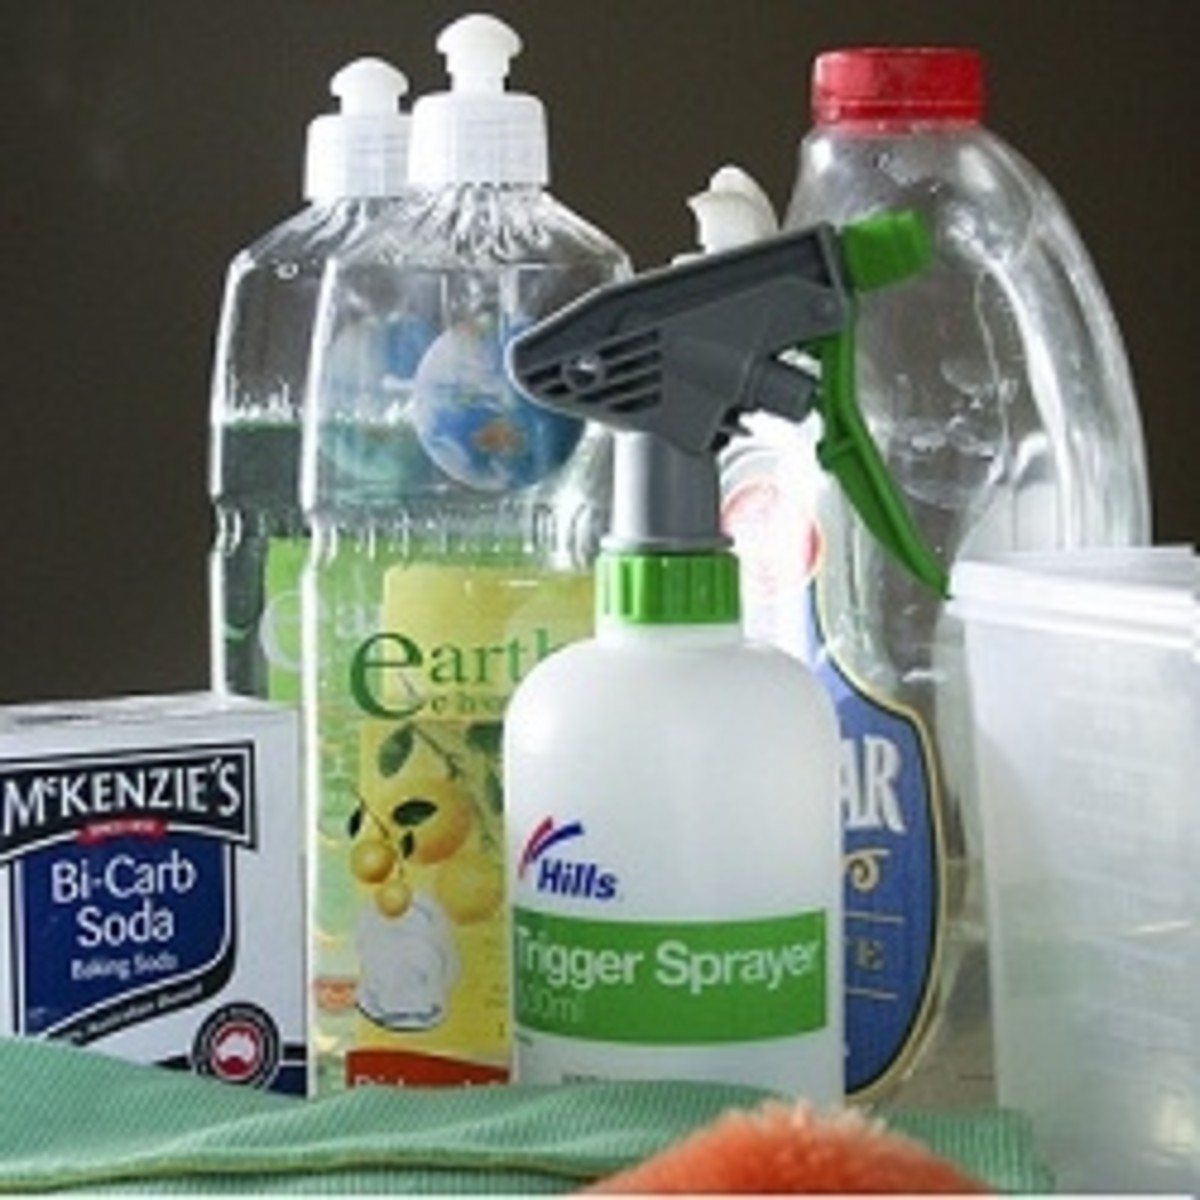 "My Green Cleaning Kit" shared via Creative Commons License